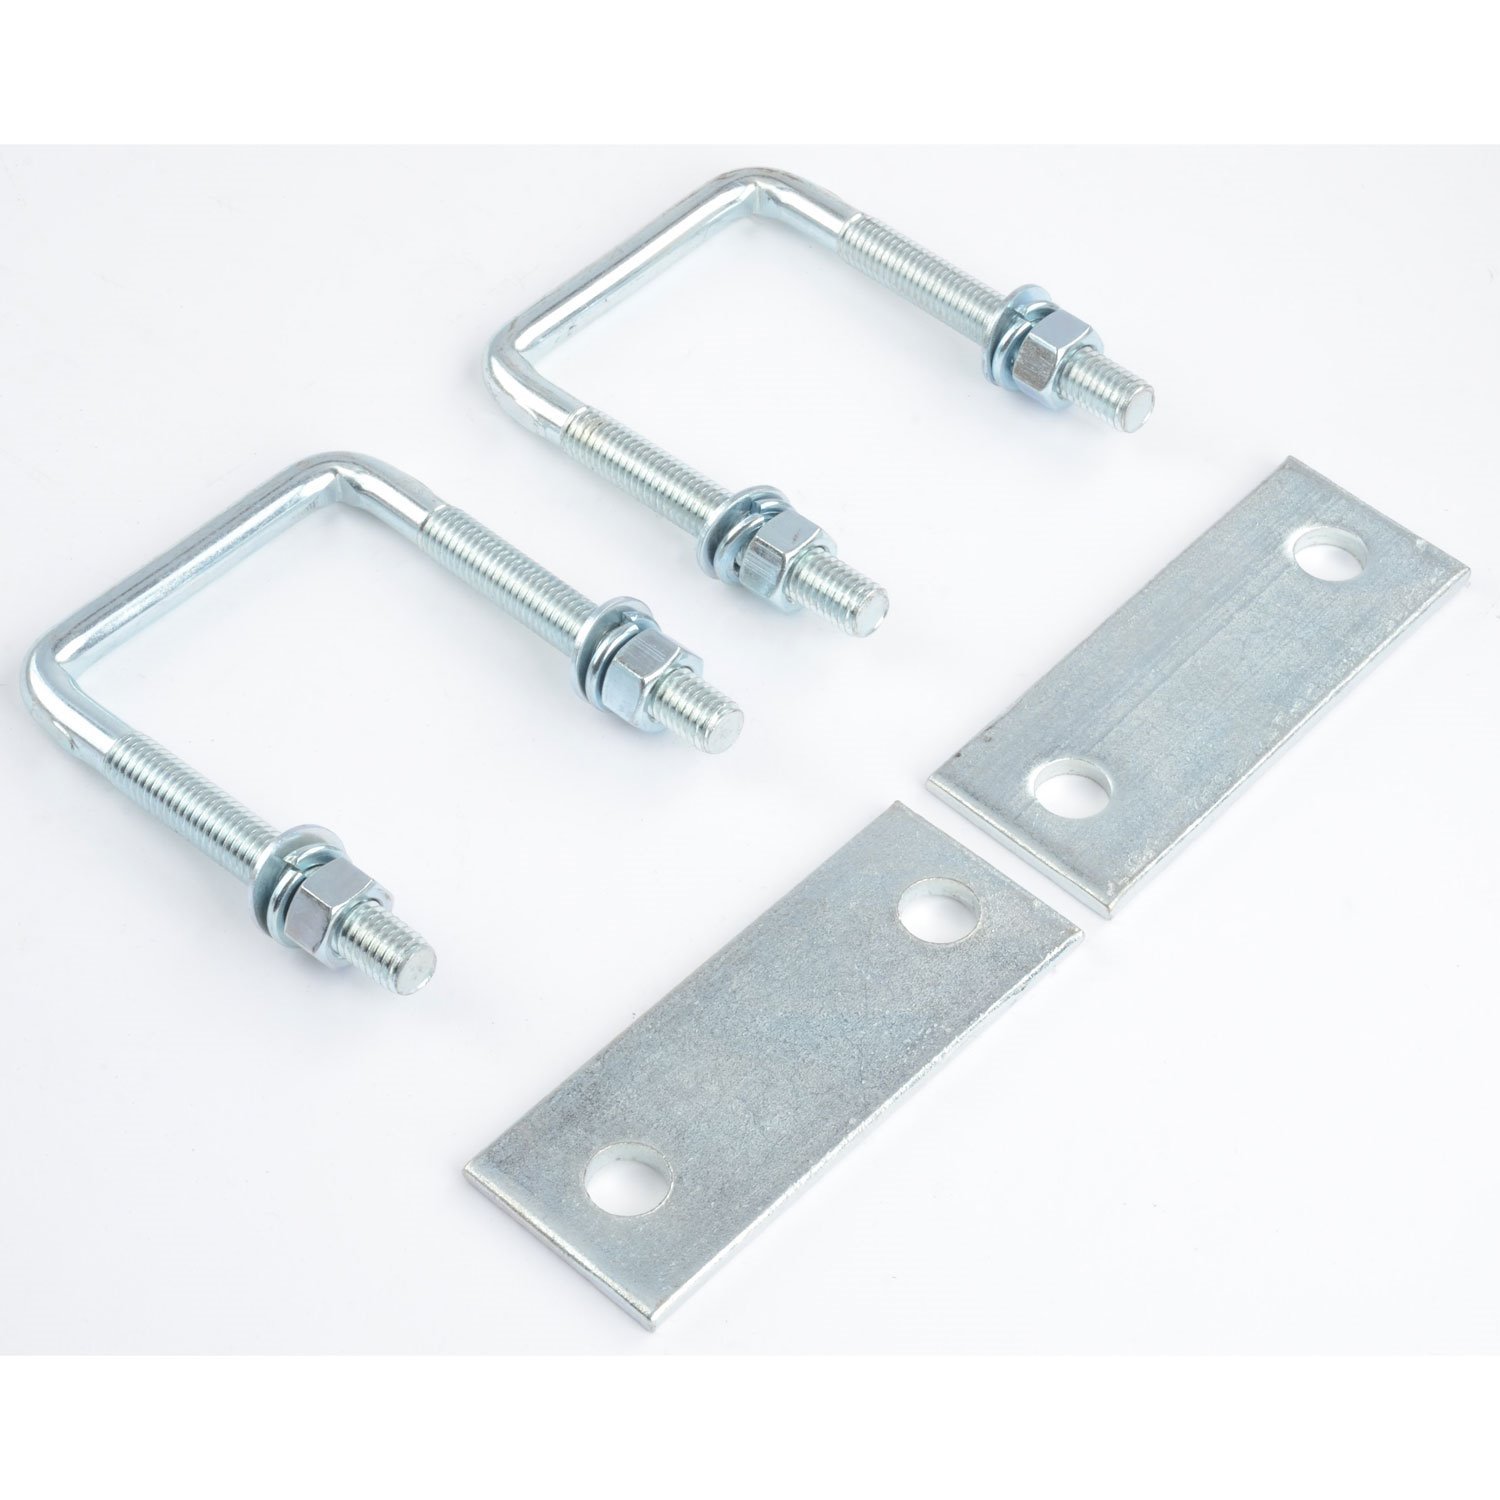 Leaf Spring Clamp Kit with 3" Leaf Spring Clamps